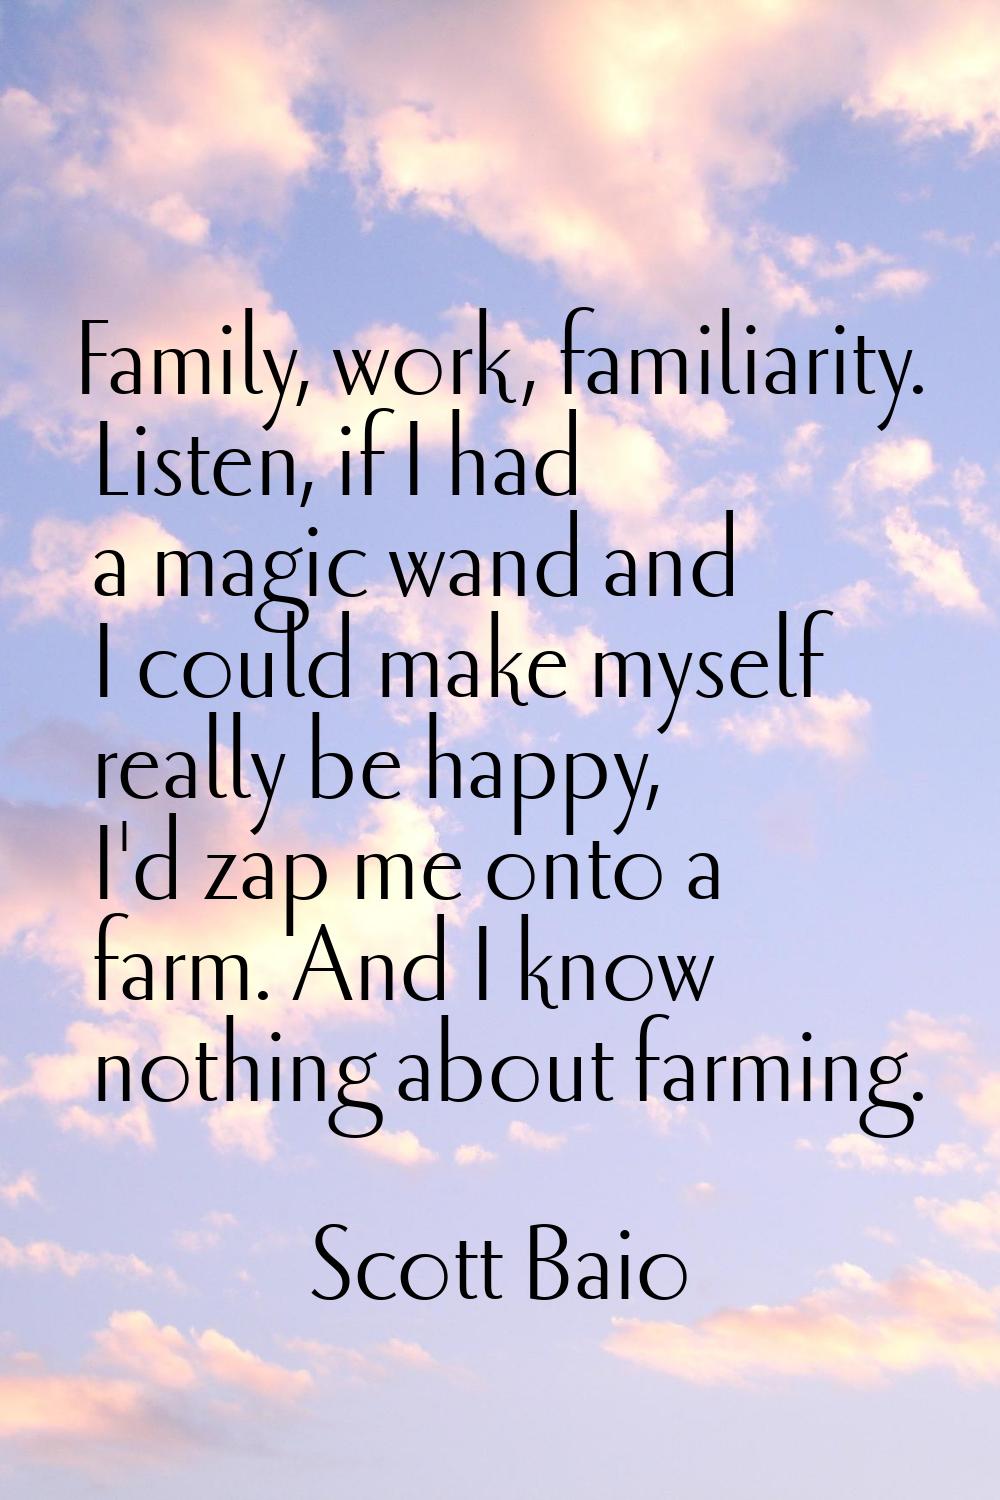 Family, work, familiarity. Listen, if I had a magic wand and I could make myself really be happy, I